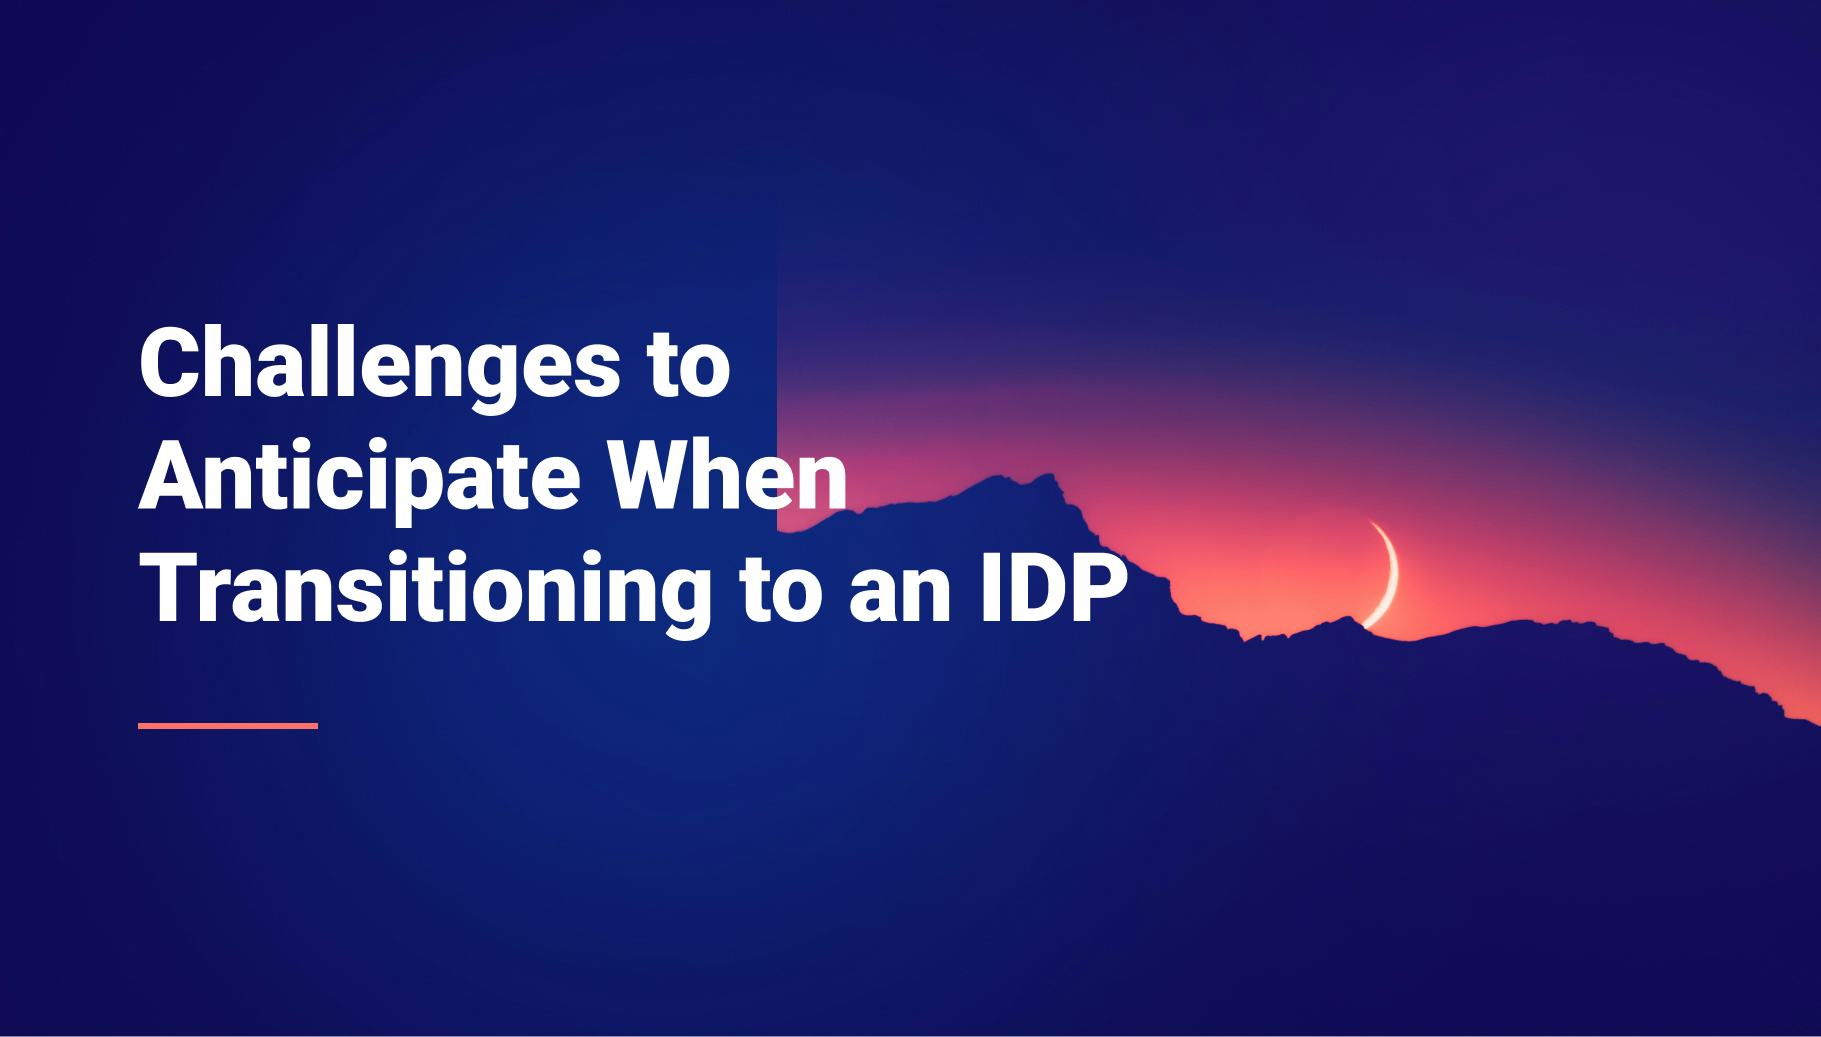 Challenges to Anticipate When Transitioning to an Internal Developer Platform  - Qovery